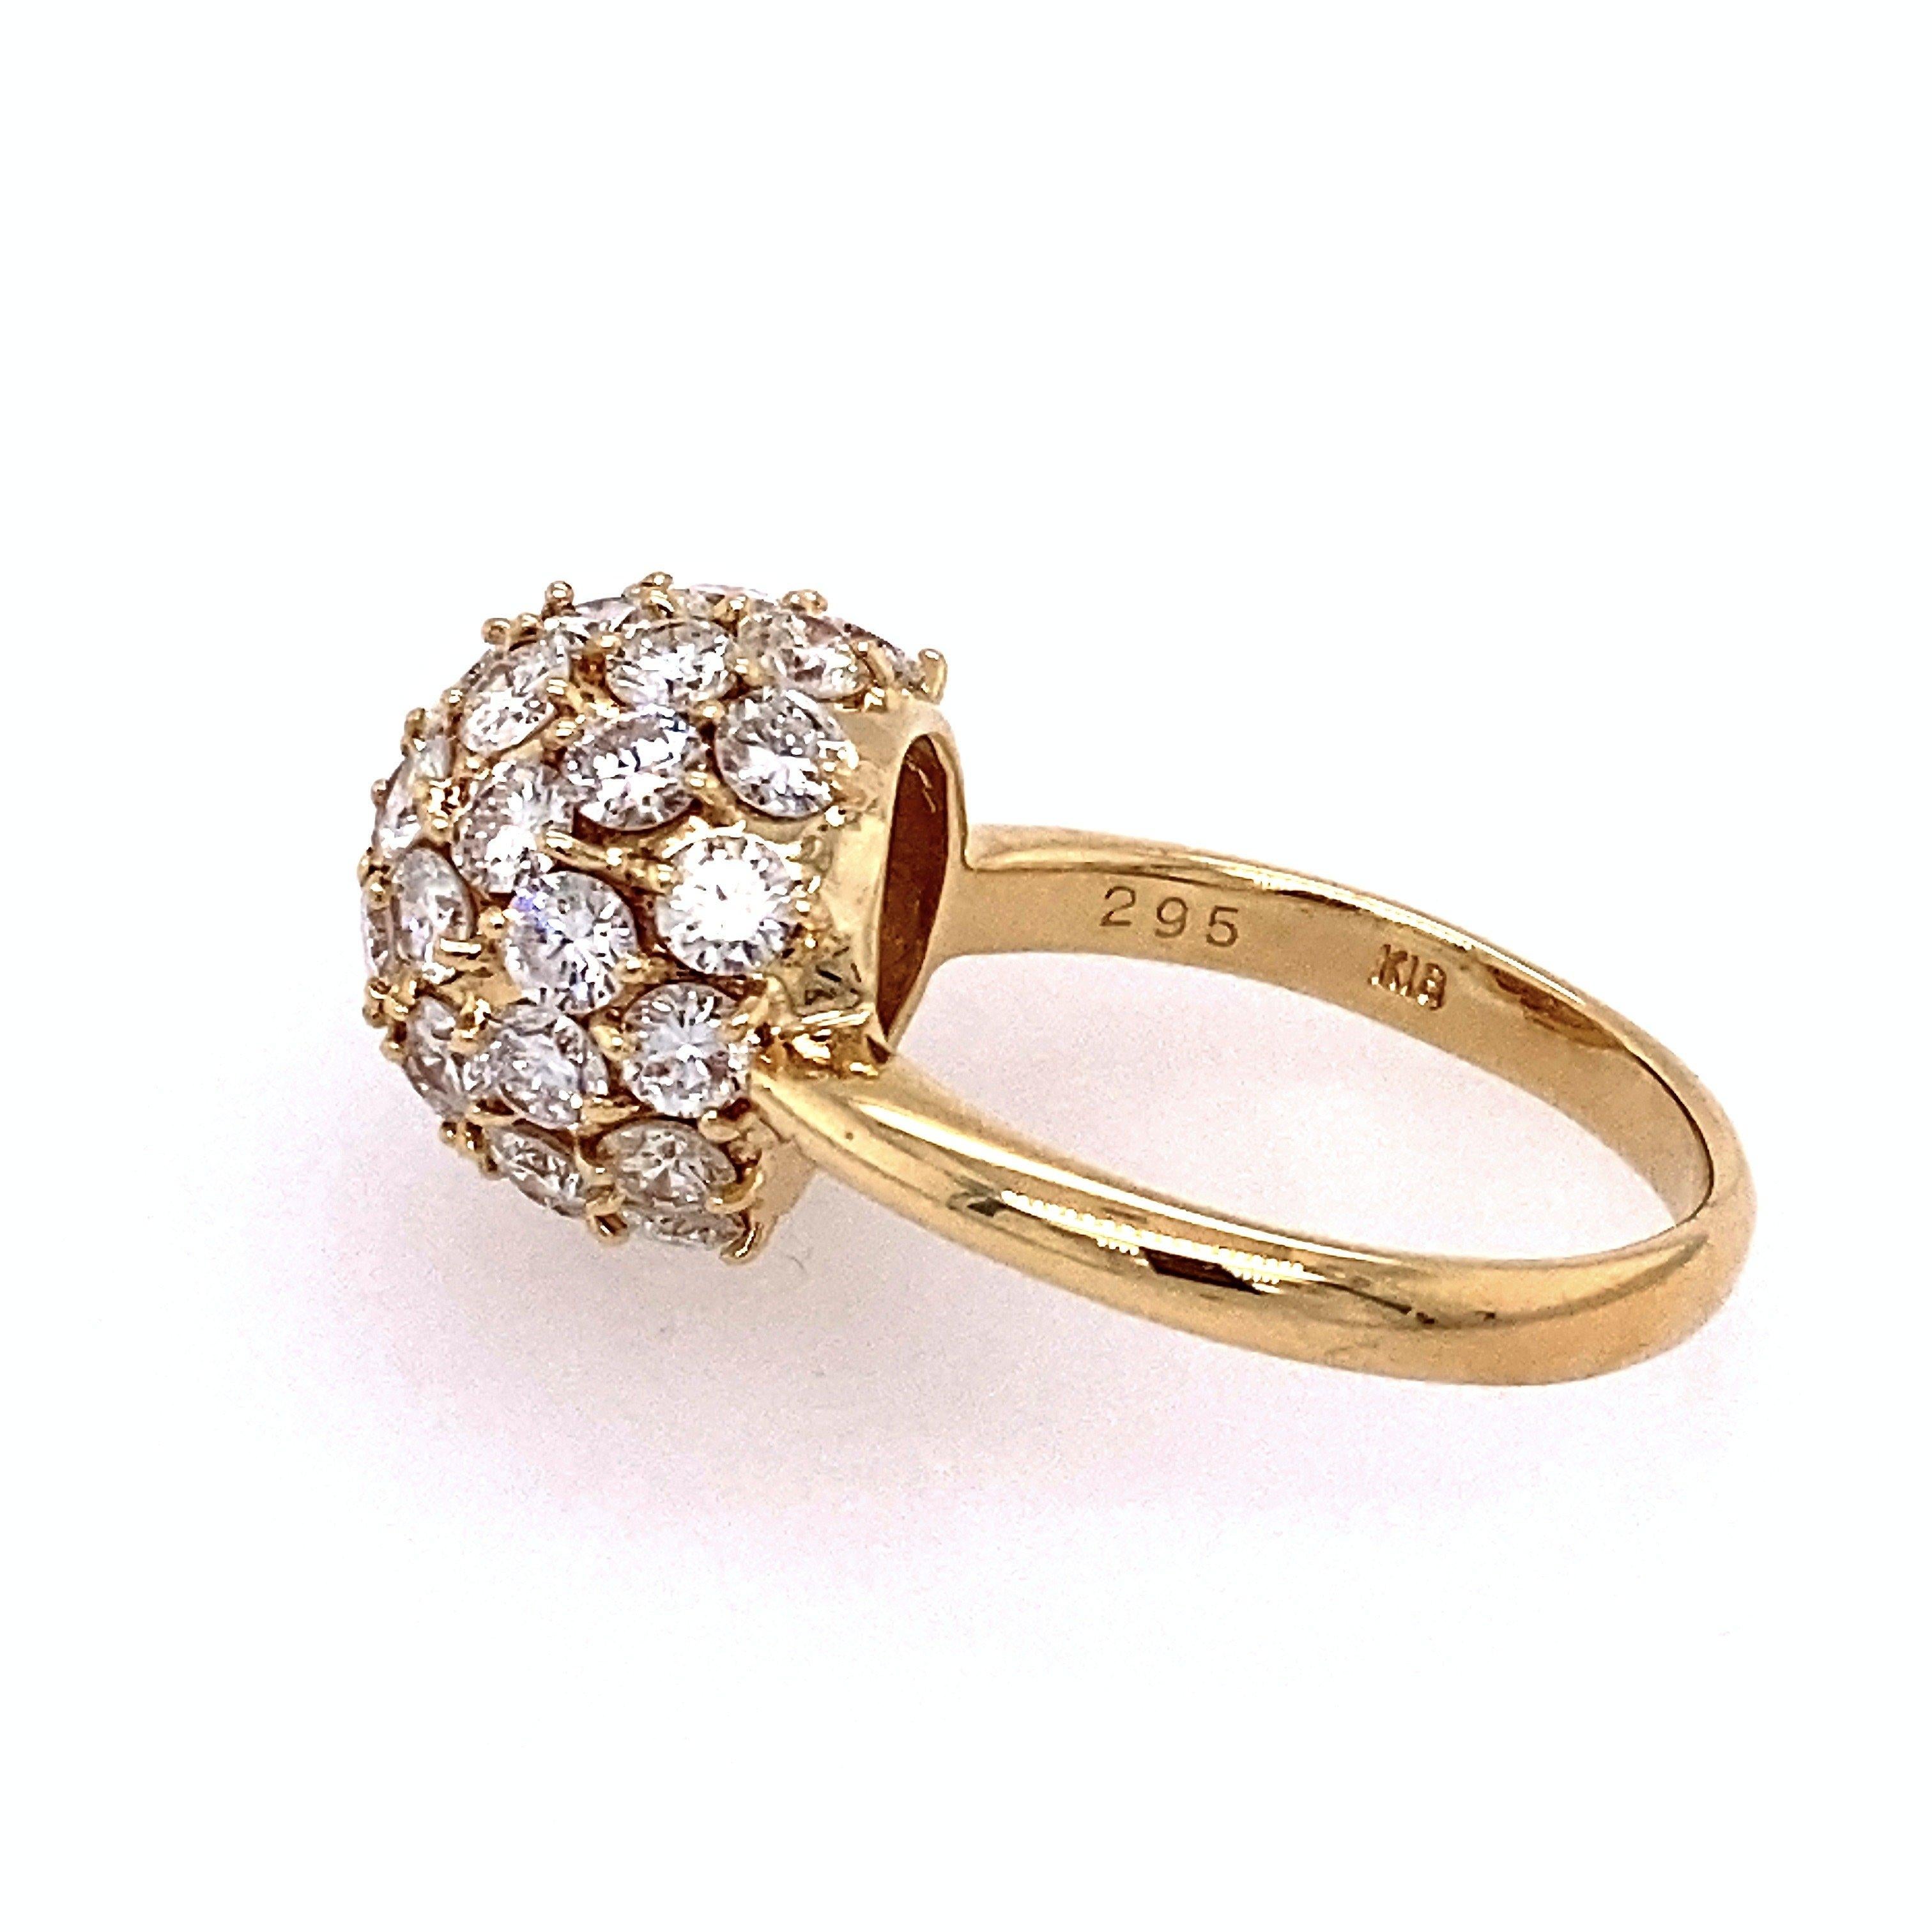 Vintage 2.95CT Diamond 18KT Yellow Gold Bombe Cocktail Ring In Good Condition For Sale In Los Angeles, CA